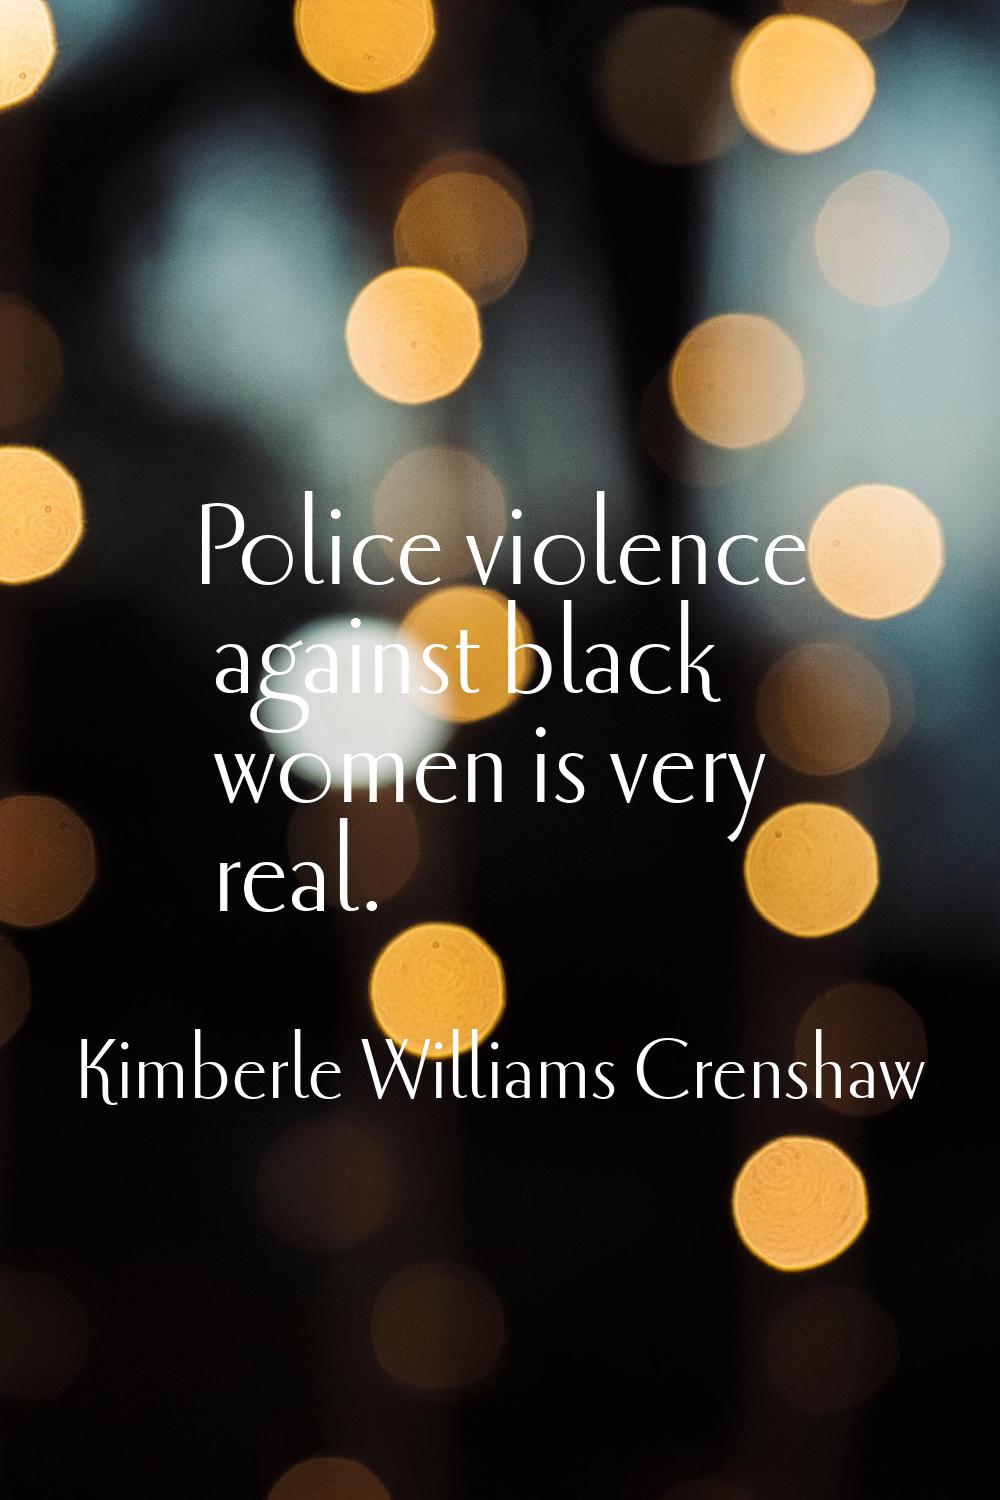 Police violence against black women is very real.